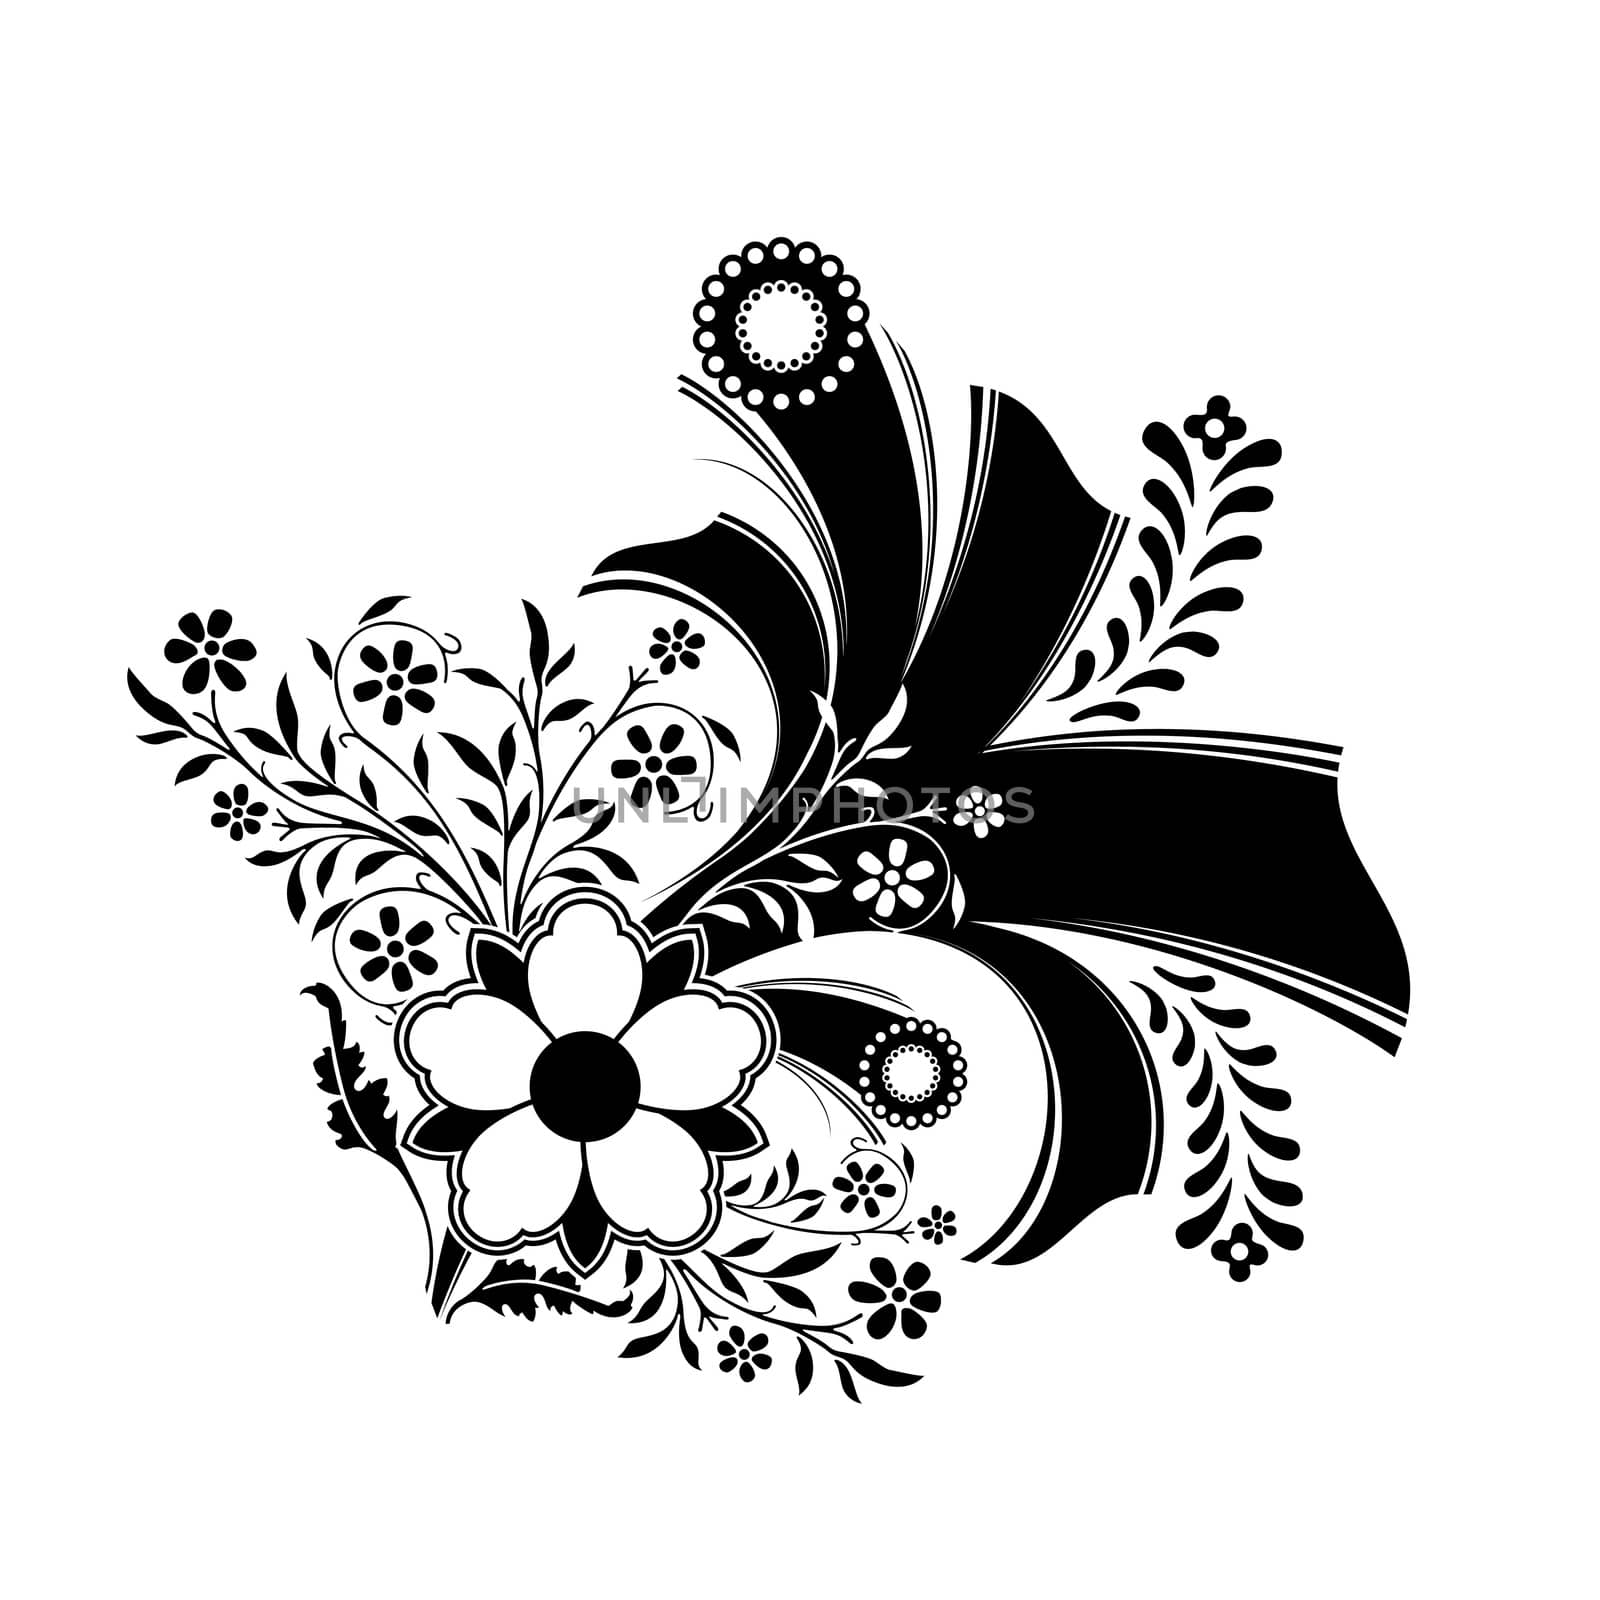 abstract floral decoration artwork in black color, vector illust by WaD